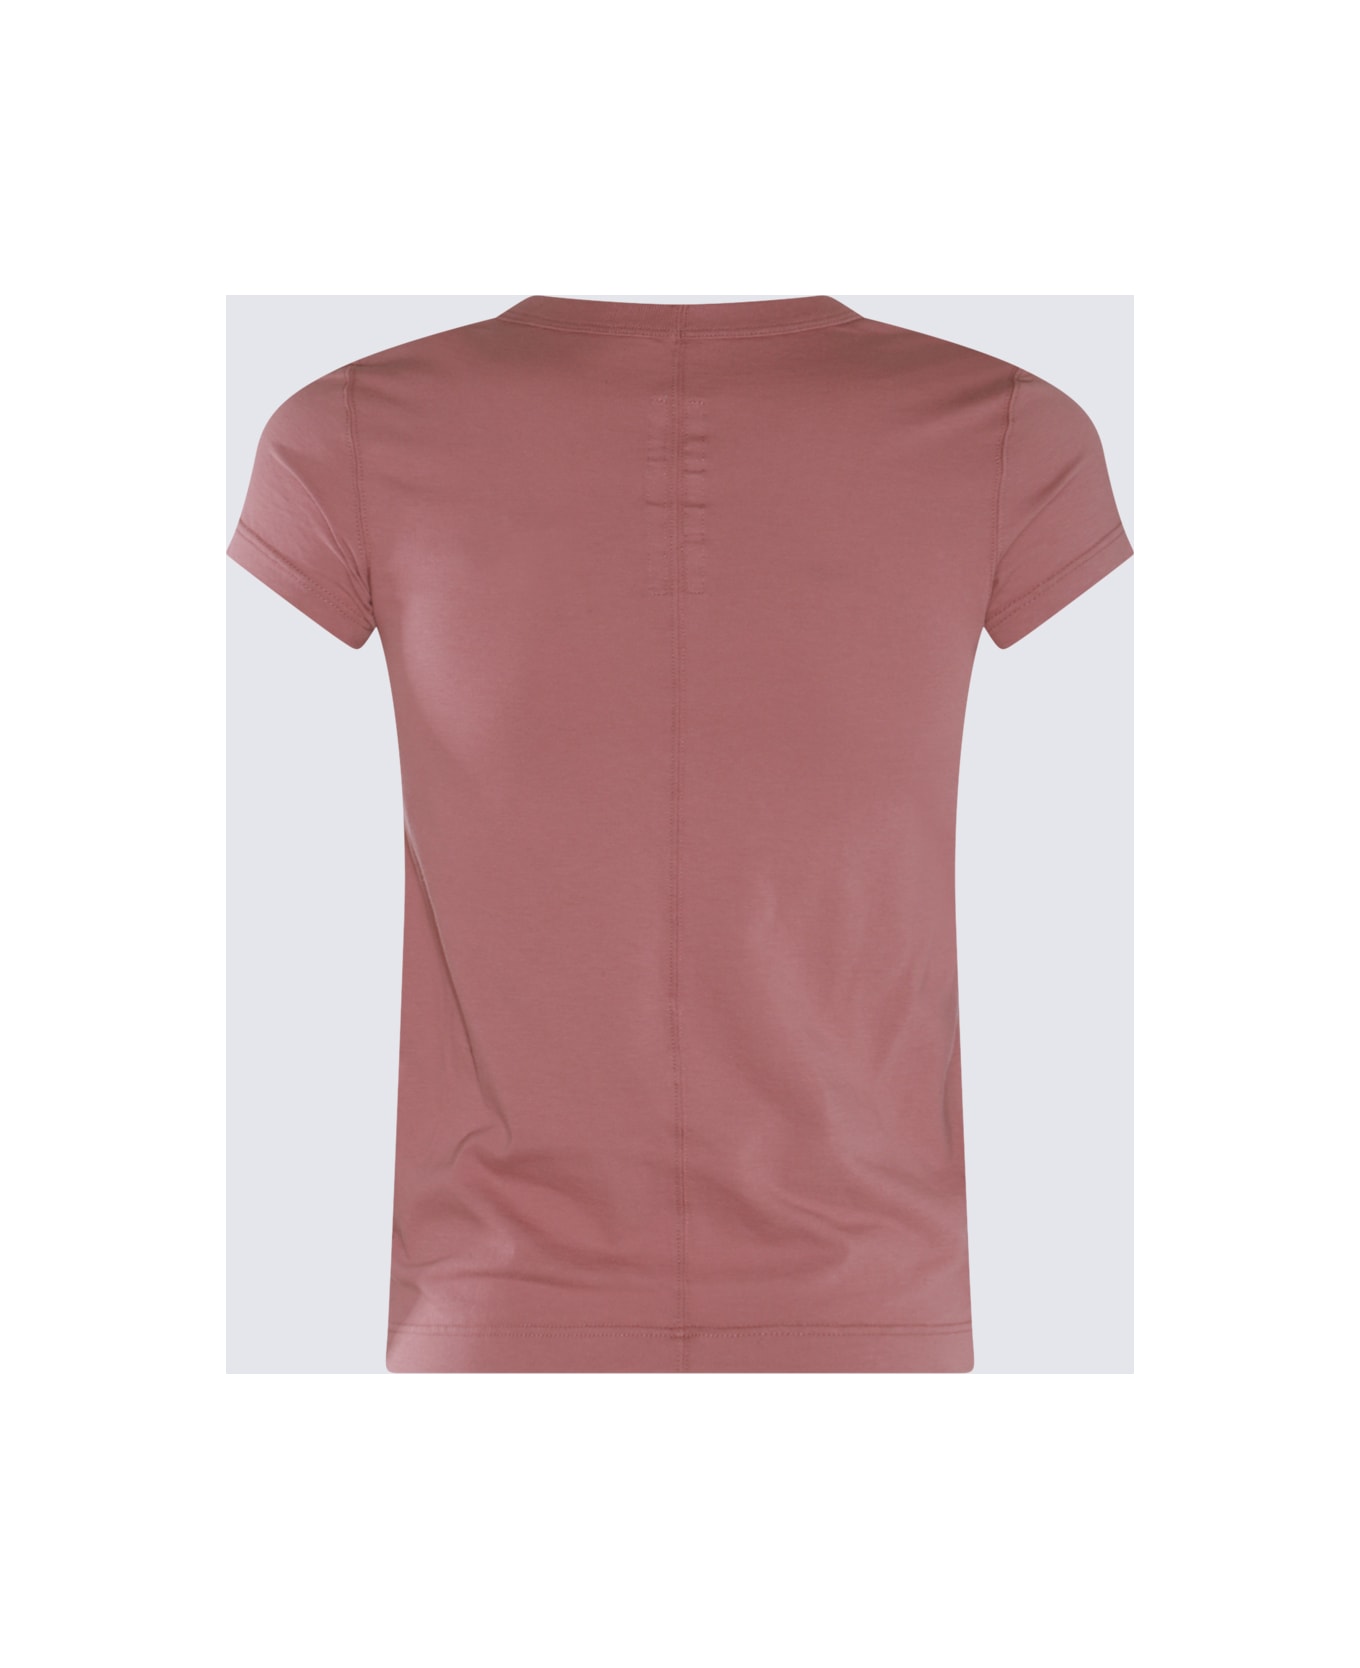 Rick Owens Dusty Pink Cotton T-shirt - DUSTy pink